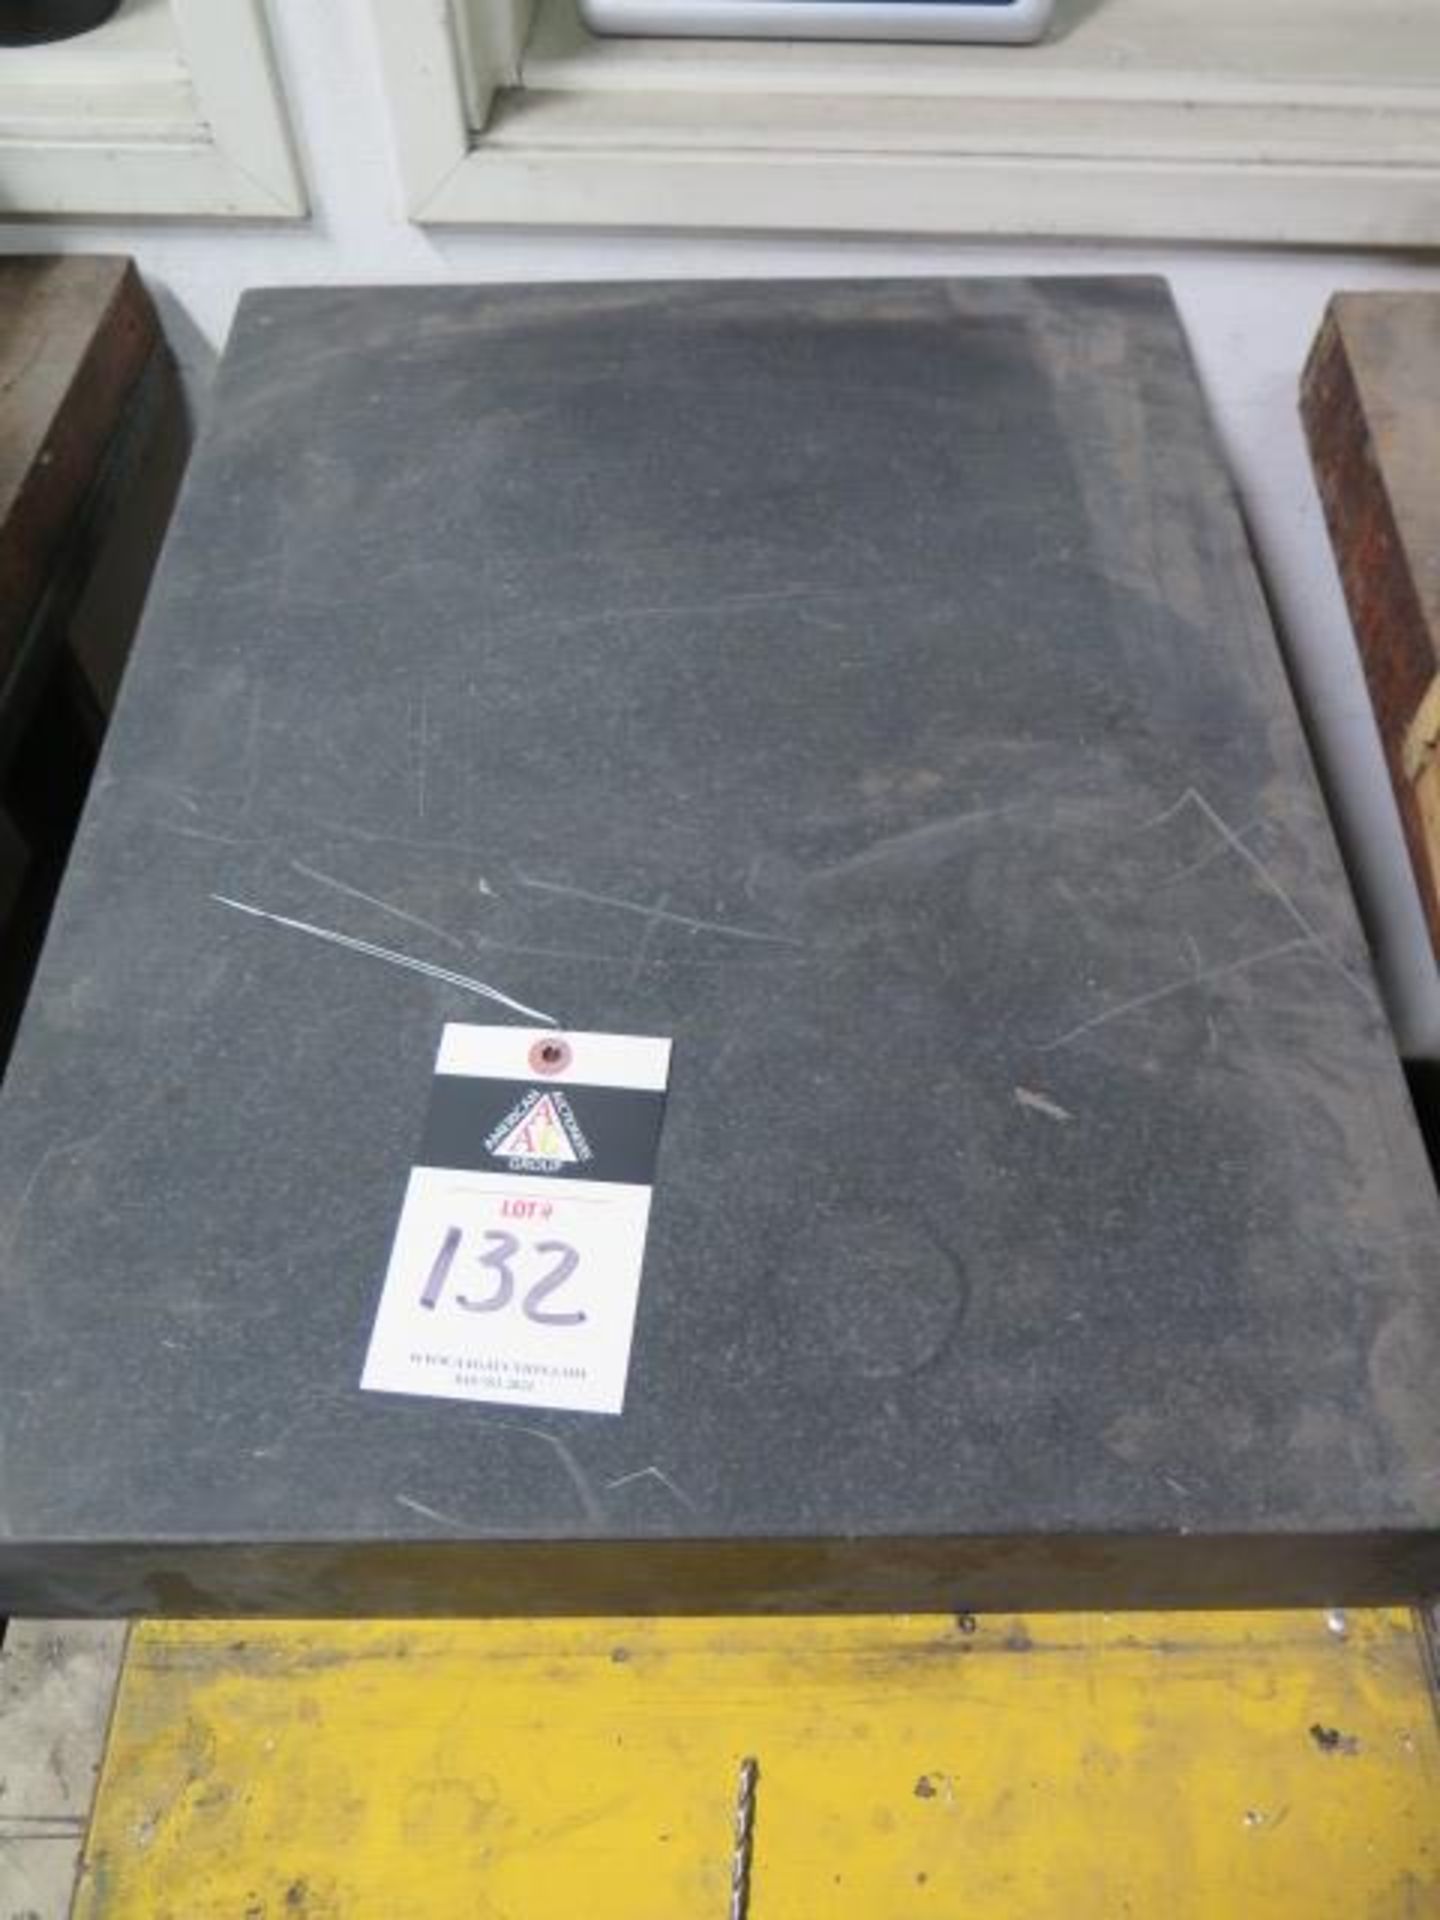 18" x 24" x 3" Granite Surface Plate w/ Cart (SOLD AS-IS - NO WARRANTY)